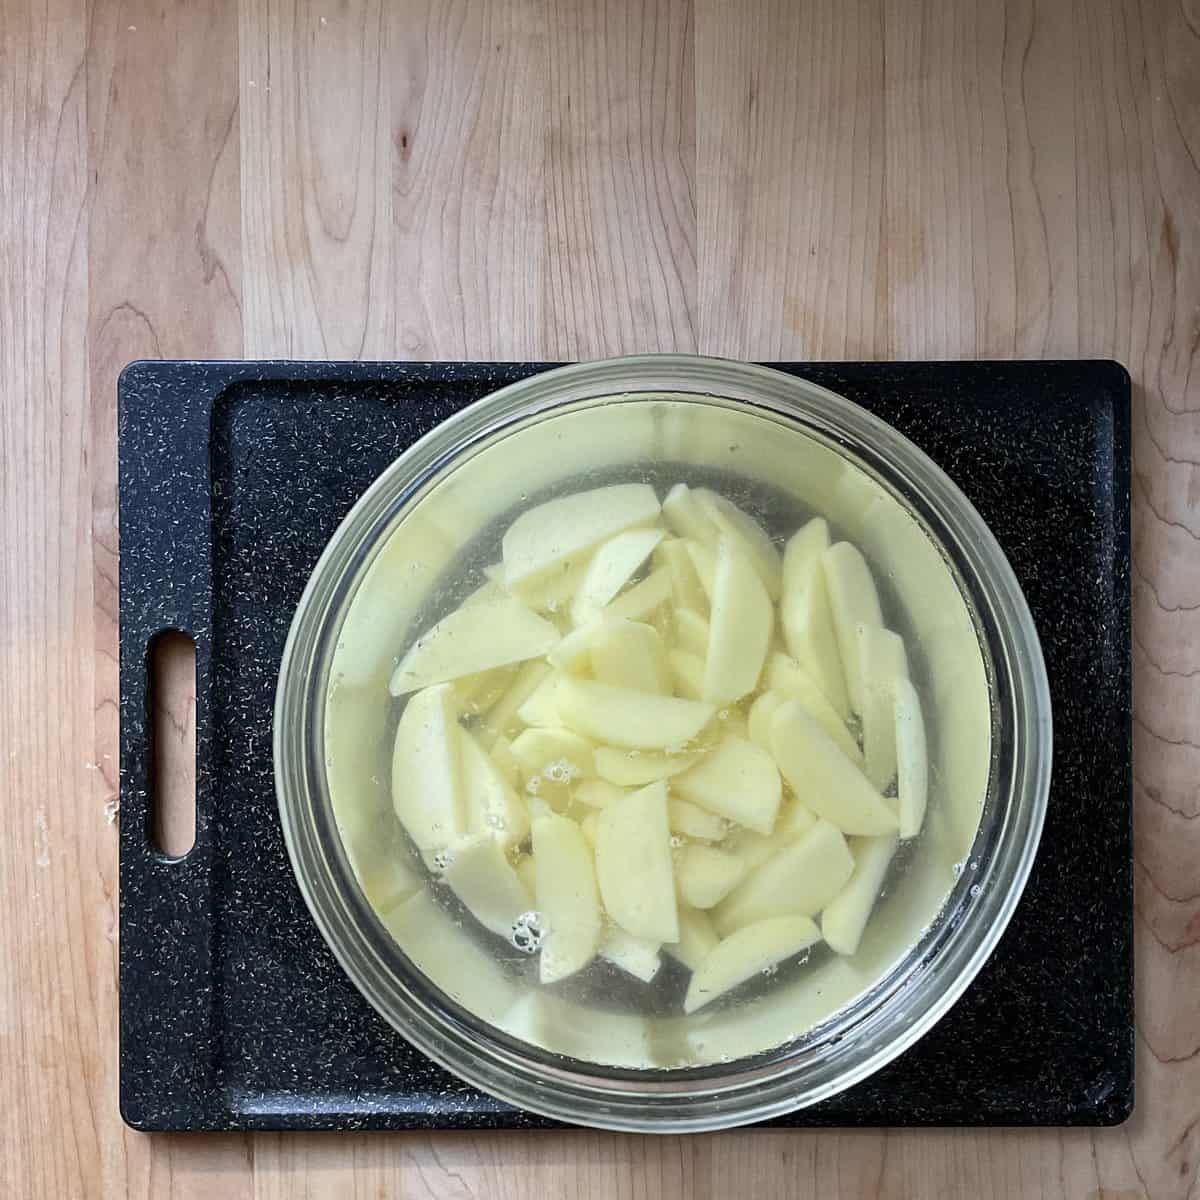 Sliced potatoes in a bowl of water.